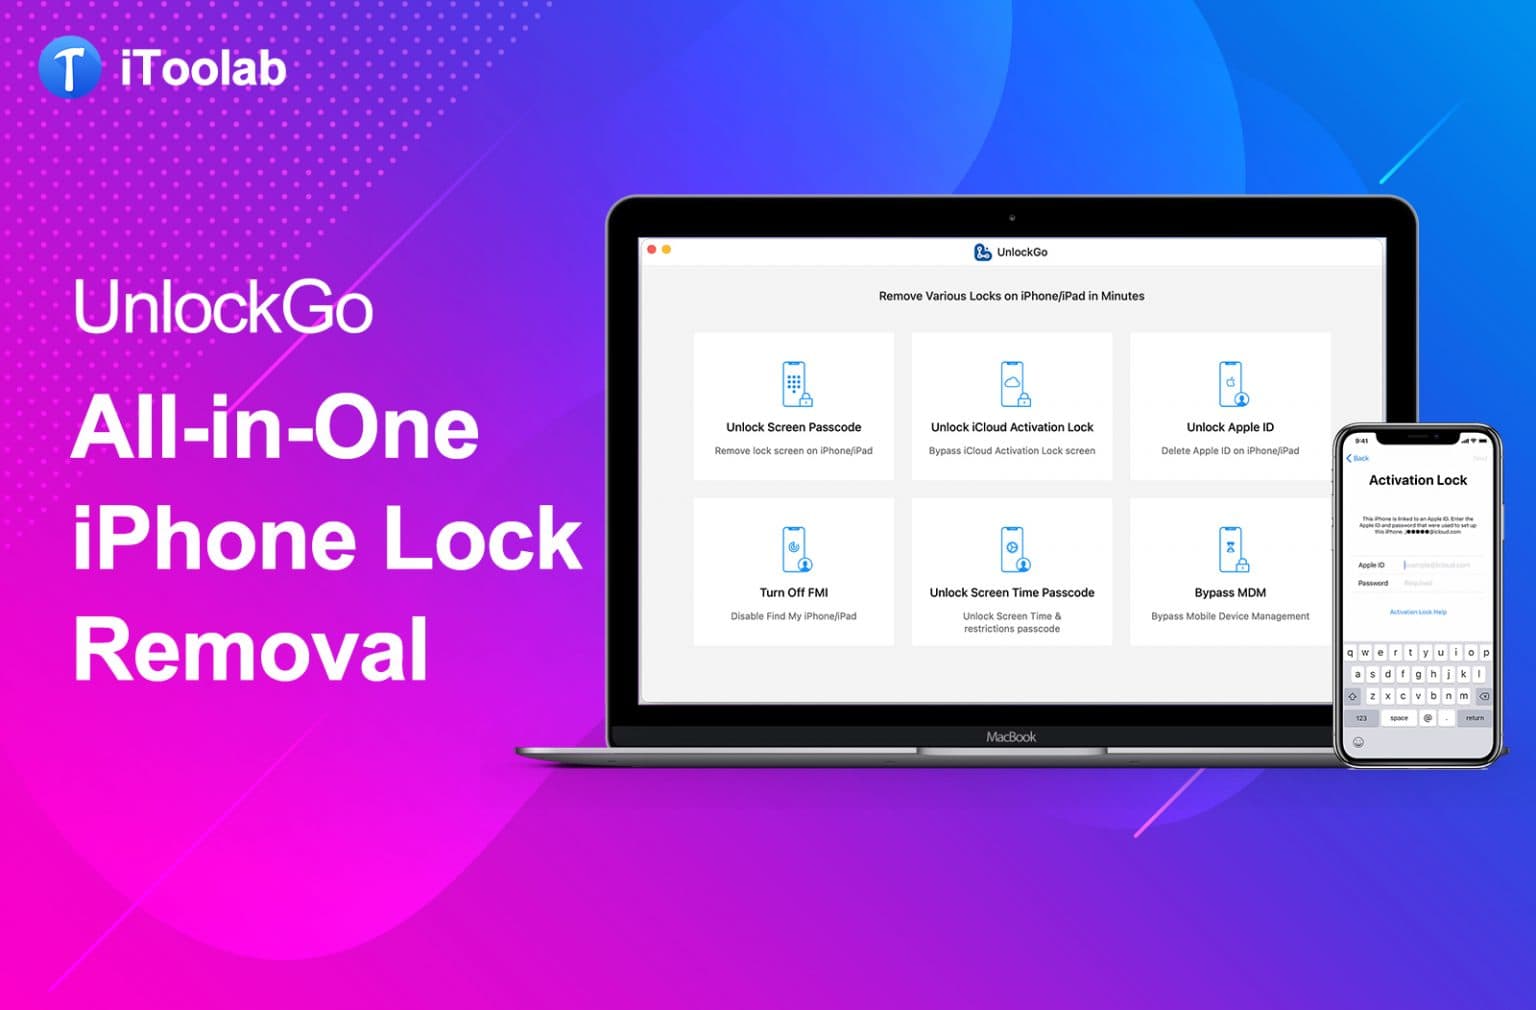 iToolab UnlockGo: For when you're locked out of your iPhone, iPad or iPod touch.